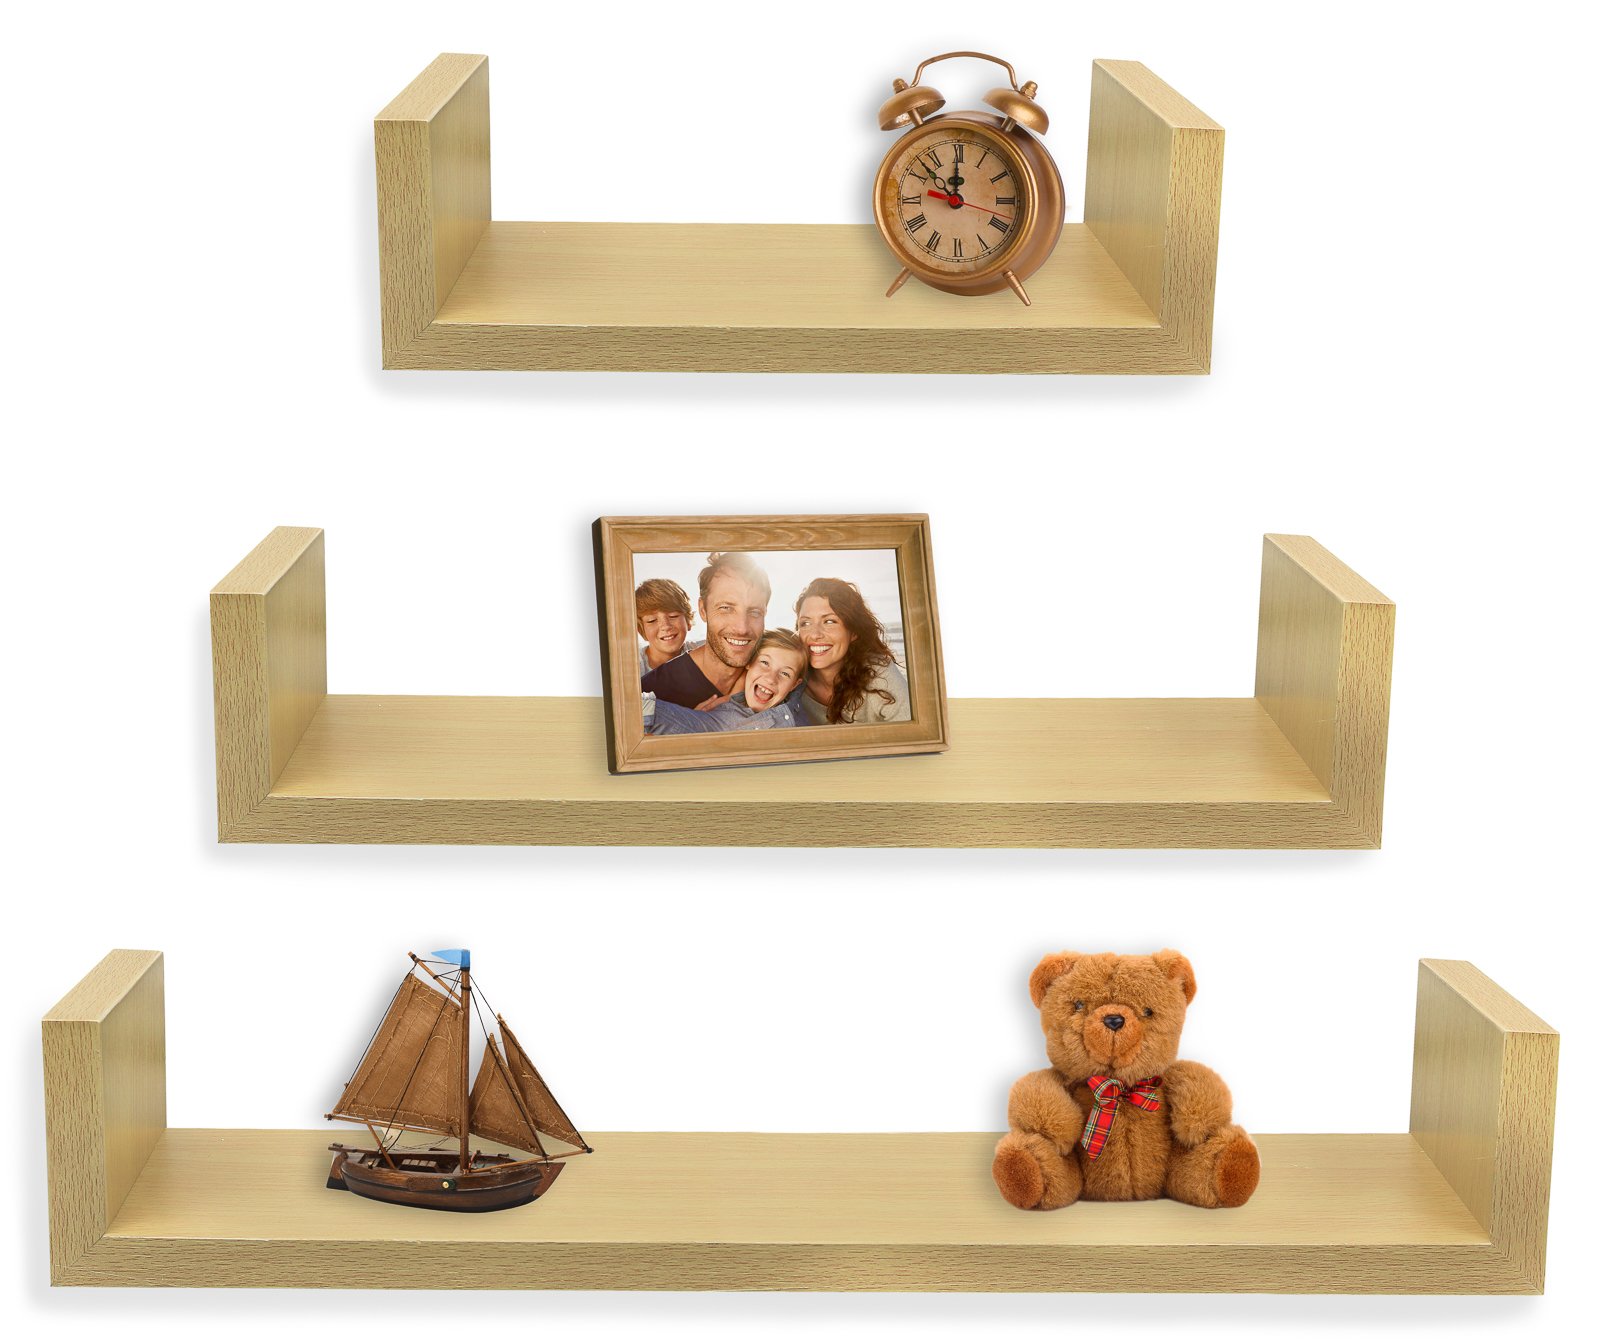 Set of 3 Greenco Floating U Shelves (Natural Finish) $10.10 + Free Shipping w/ Prime or on $25+